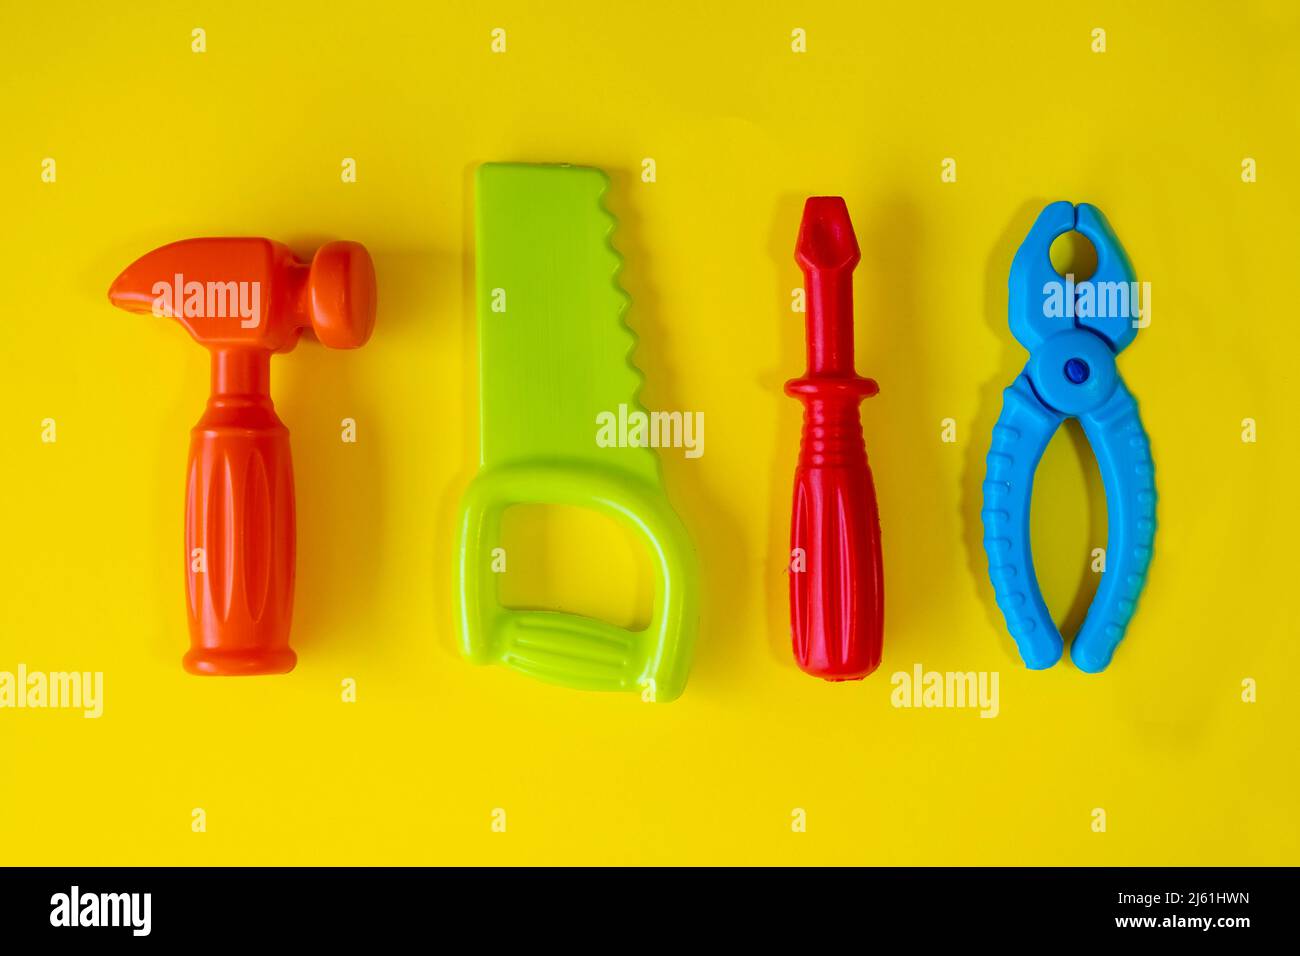 Colorful repair toys on yellow background, child's play isolated on yellow backdrop, playing idea, colored screwdriver pliers saw hammer, top view Stock Photo